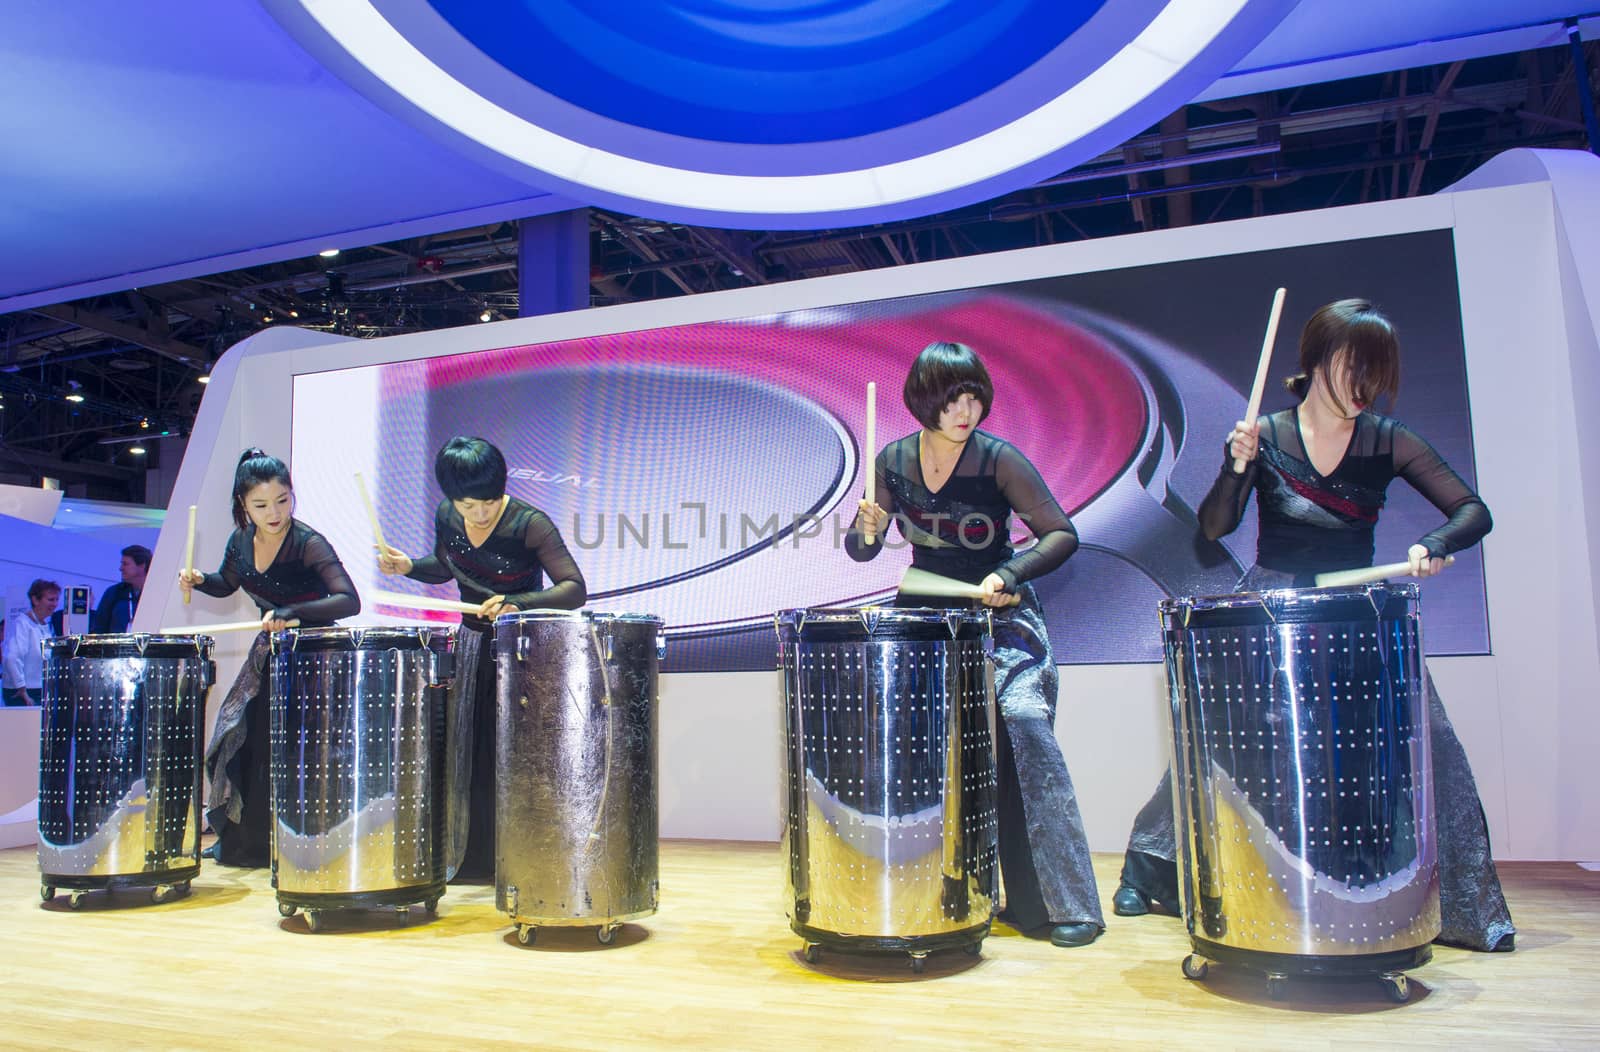 LAS VEGAS - JANUARY 10 : Group of drummers at the CES show held in Las Vegas on January 10 2014 , CES is the world's leading consumer-electronics show 